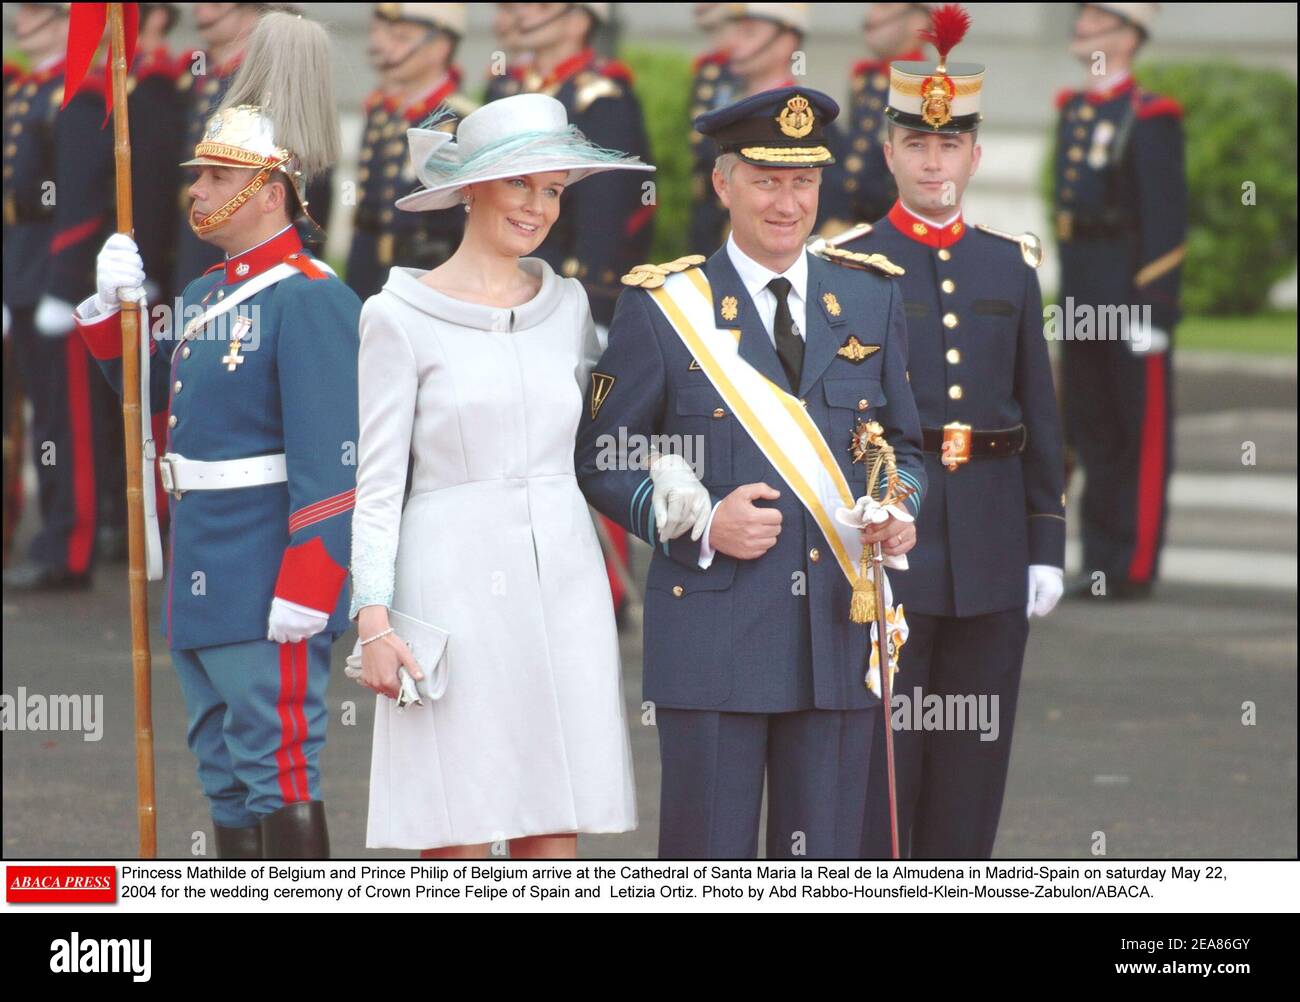 Princess Mathilde of Belgium and Prince Philippe of Belgium arrive at the Cathedral of Santa Maria la Real de la Almudena in Madrid-Spain on saturday May 22, 2004 for the wedding ceremony of Crown Prince Felipe of Spain and Letizia Ortiz. Photo by Abd Rabbo-Hounsfield-Klein-Mousse-Zabulon/ABACA. Stock Photo